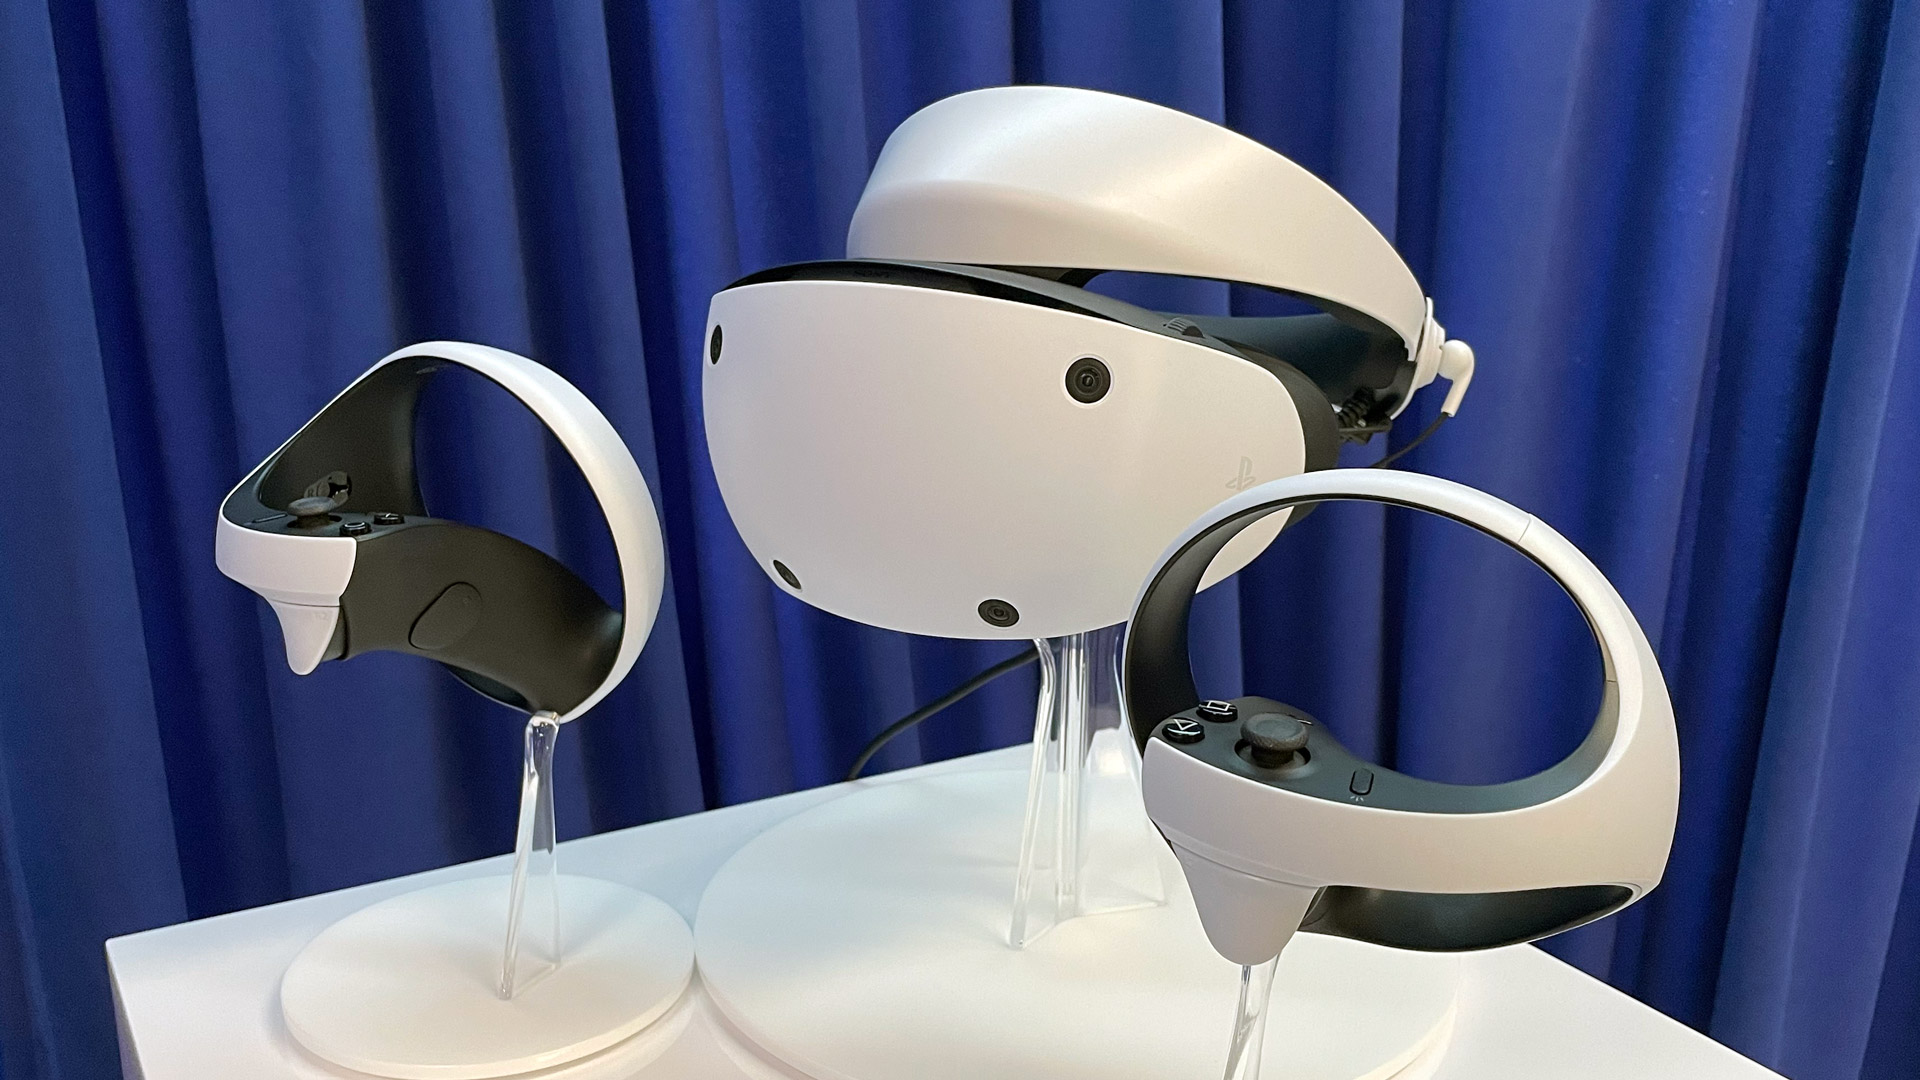 Sony Plans to Produce 2 Million PSVR 2 Headsets by March 2023 – Road to VR